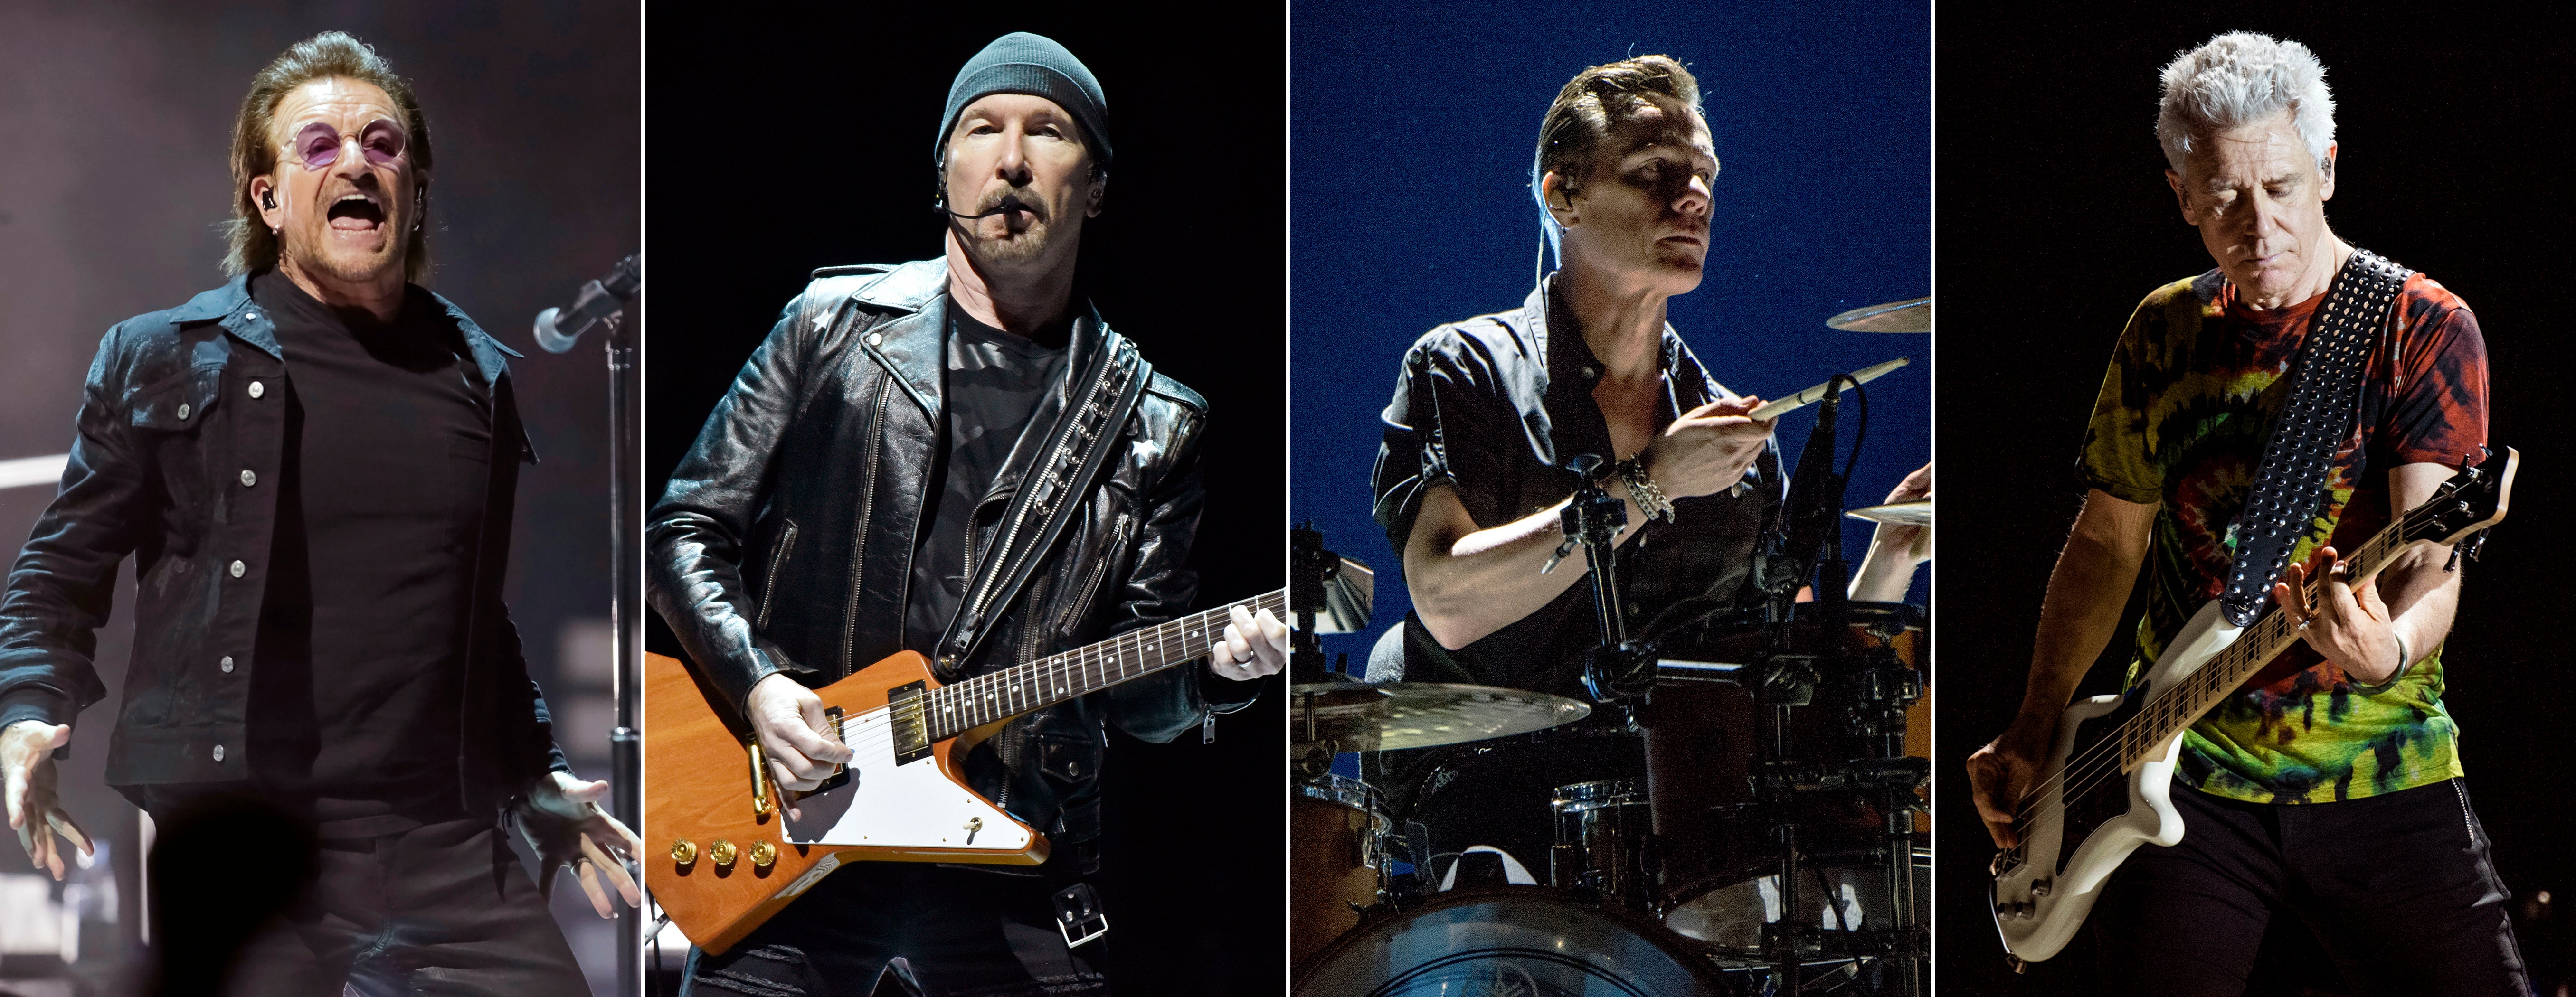 U2 creating new experience with Sphere Las Vegas concerts The Independent